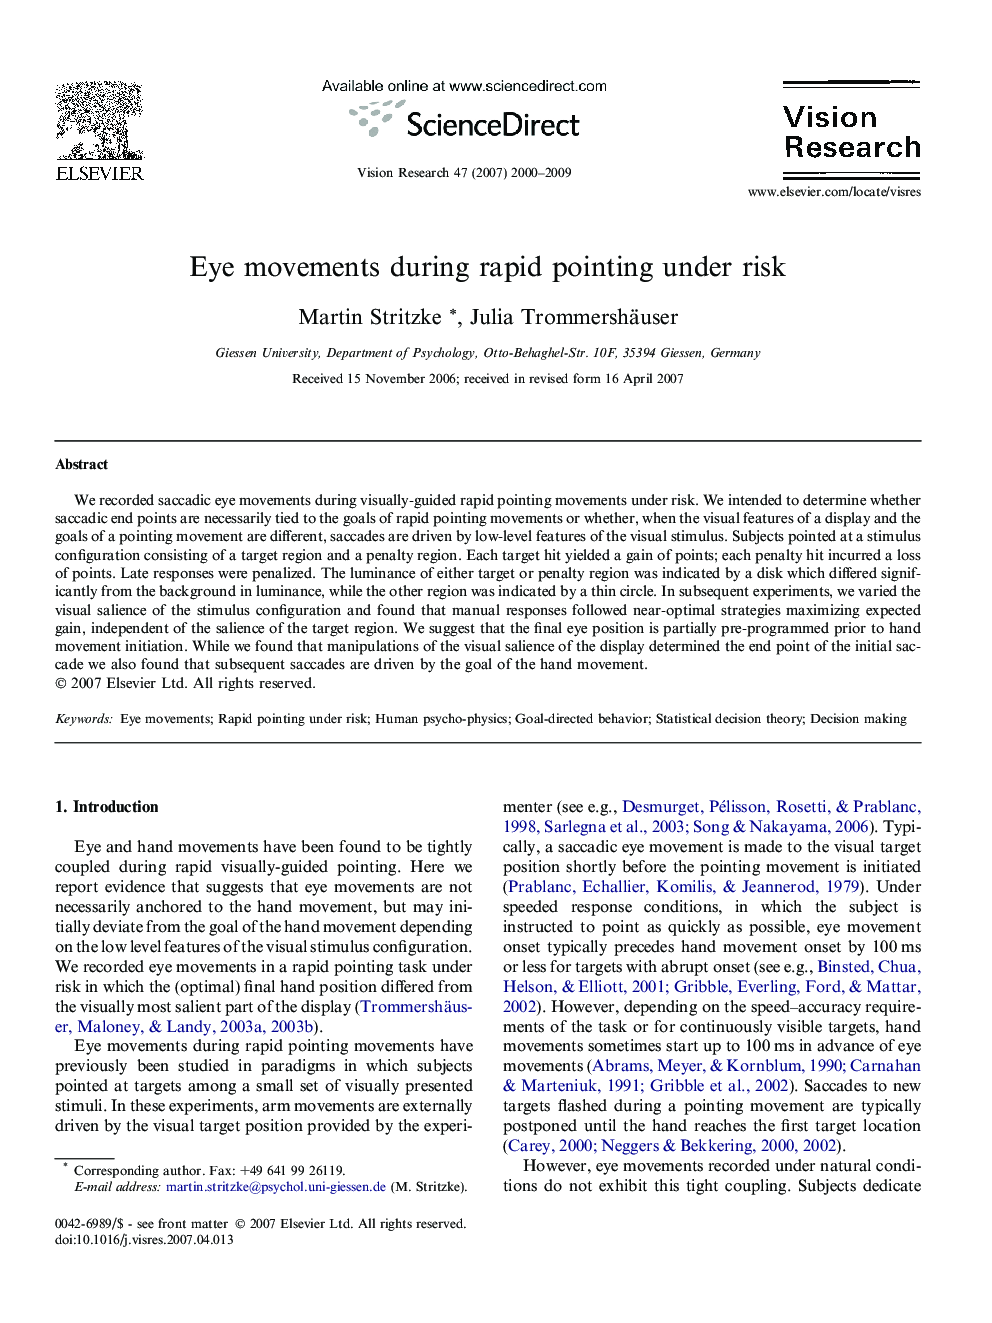 Eye movements during rapid pointing under risk